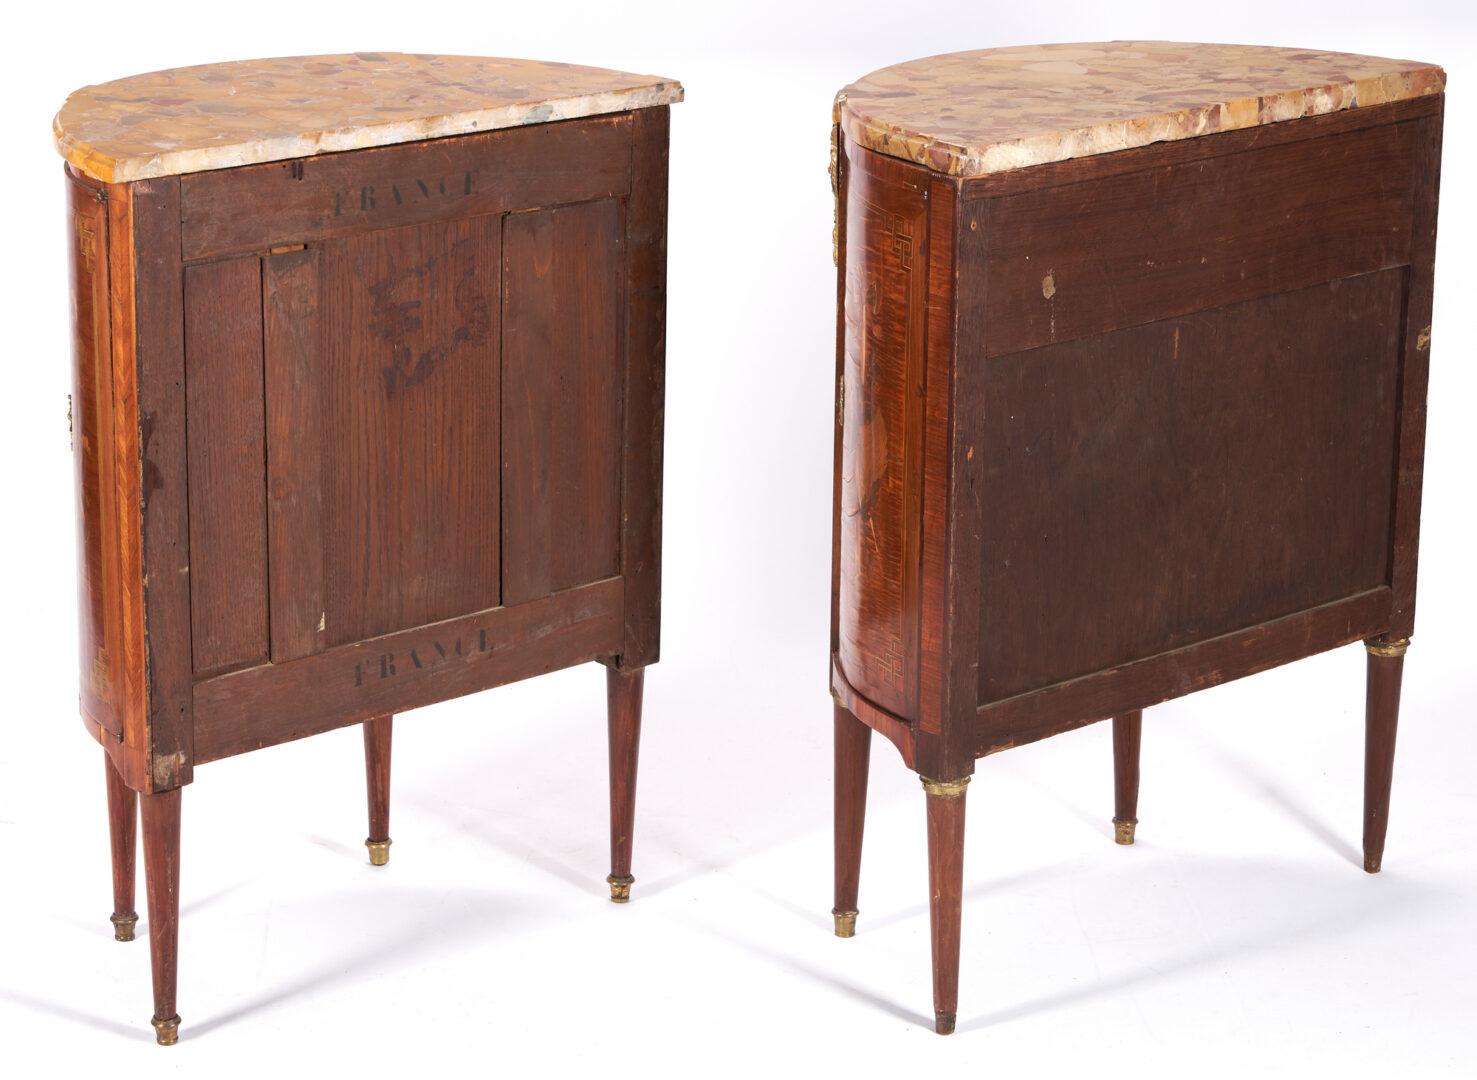 Lot 905: Near Pair of Louis XVI Style Marquetry Demilune Commodes